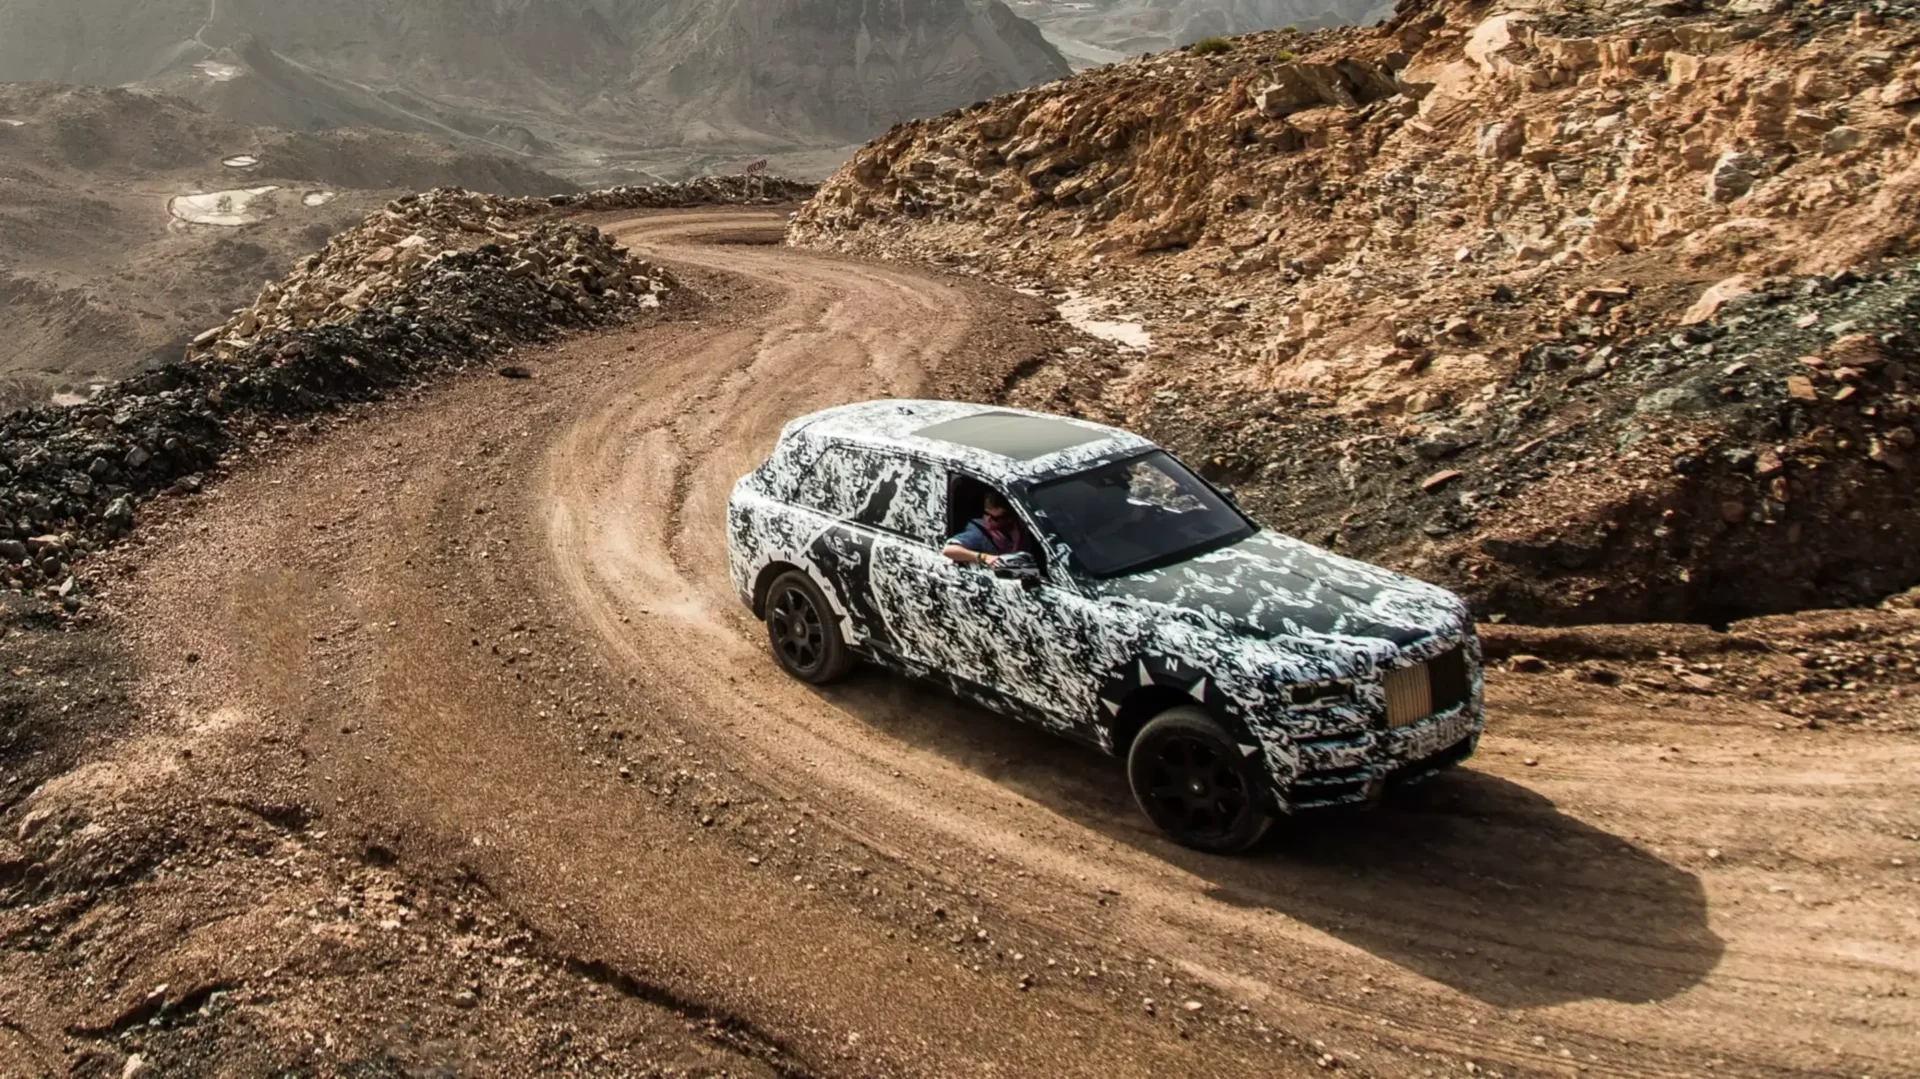 The 2022 Rolls-Royce Cullinan Can Go Offroad